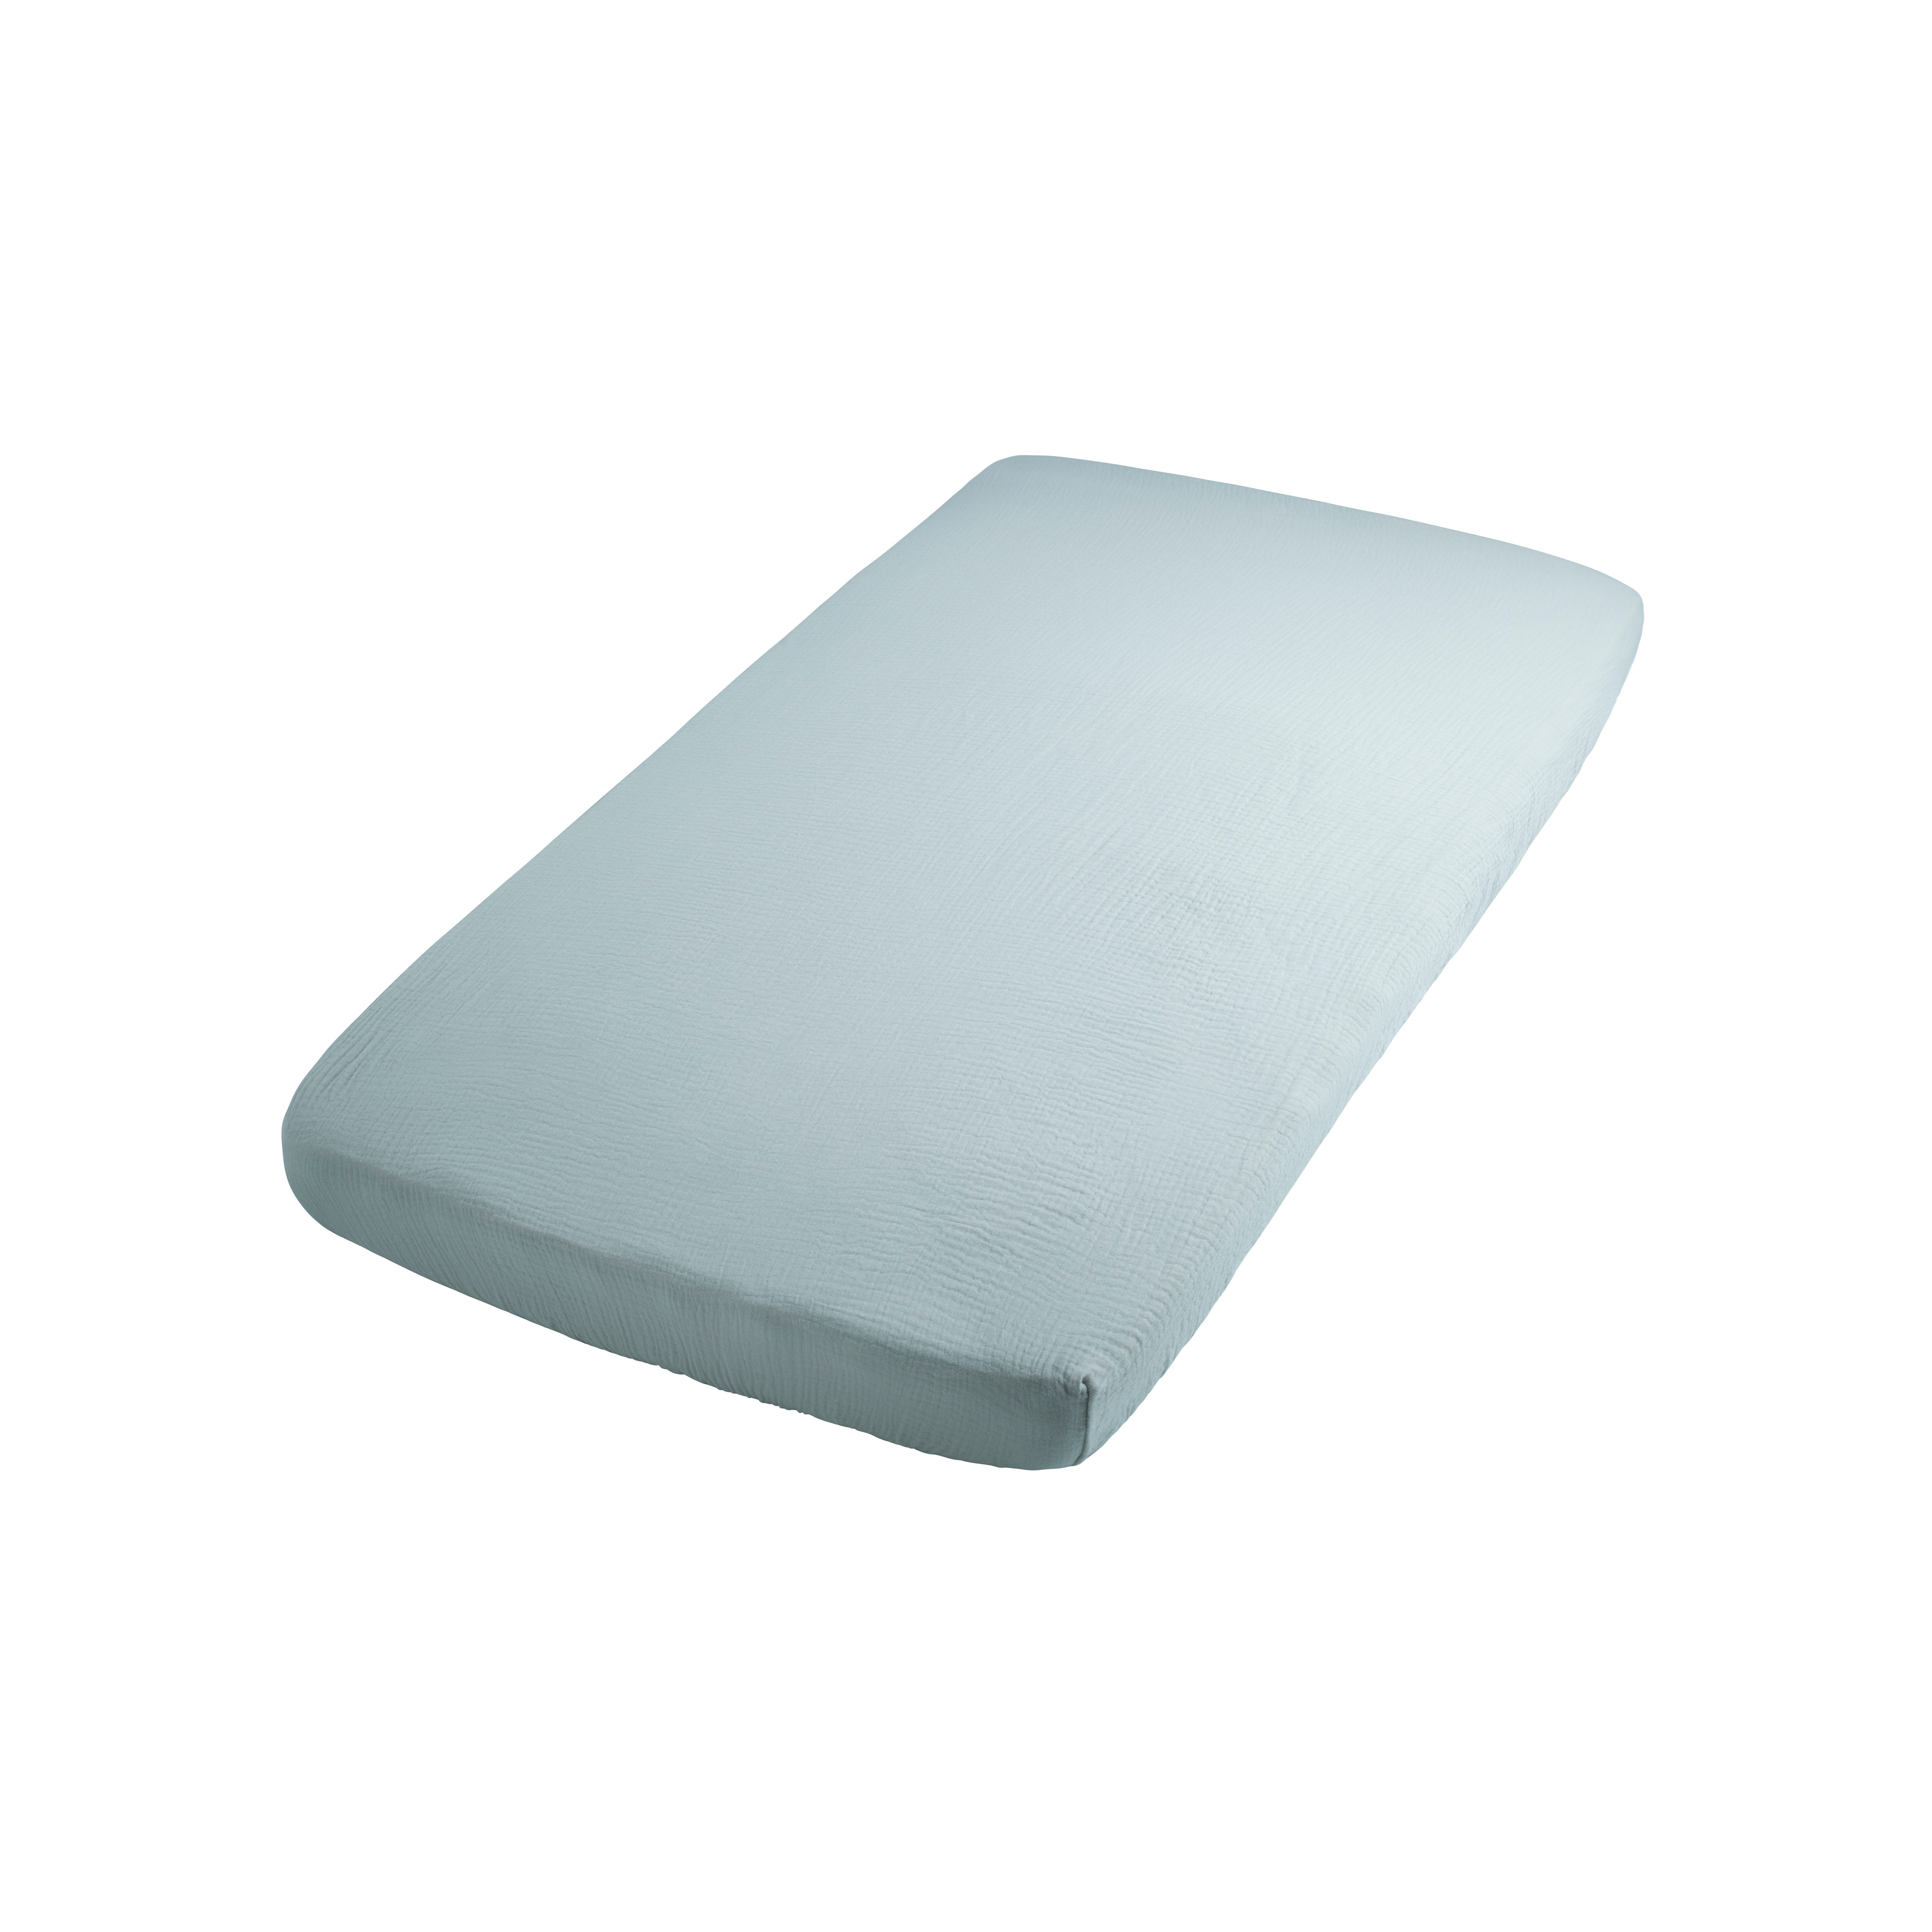 Fitted sheet Fresh ECO misty blue - 40x80